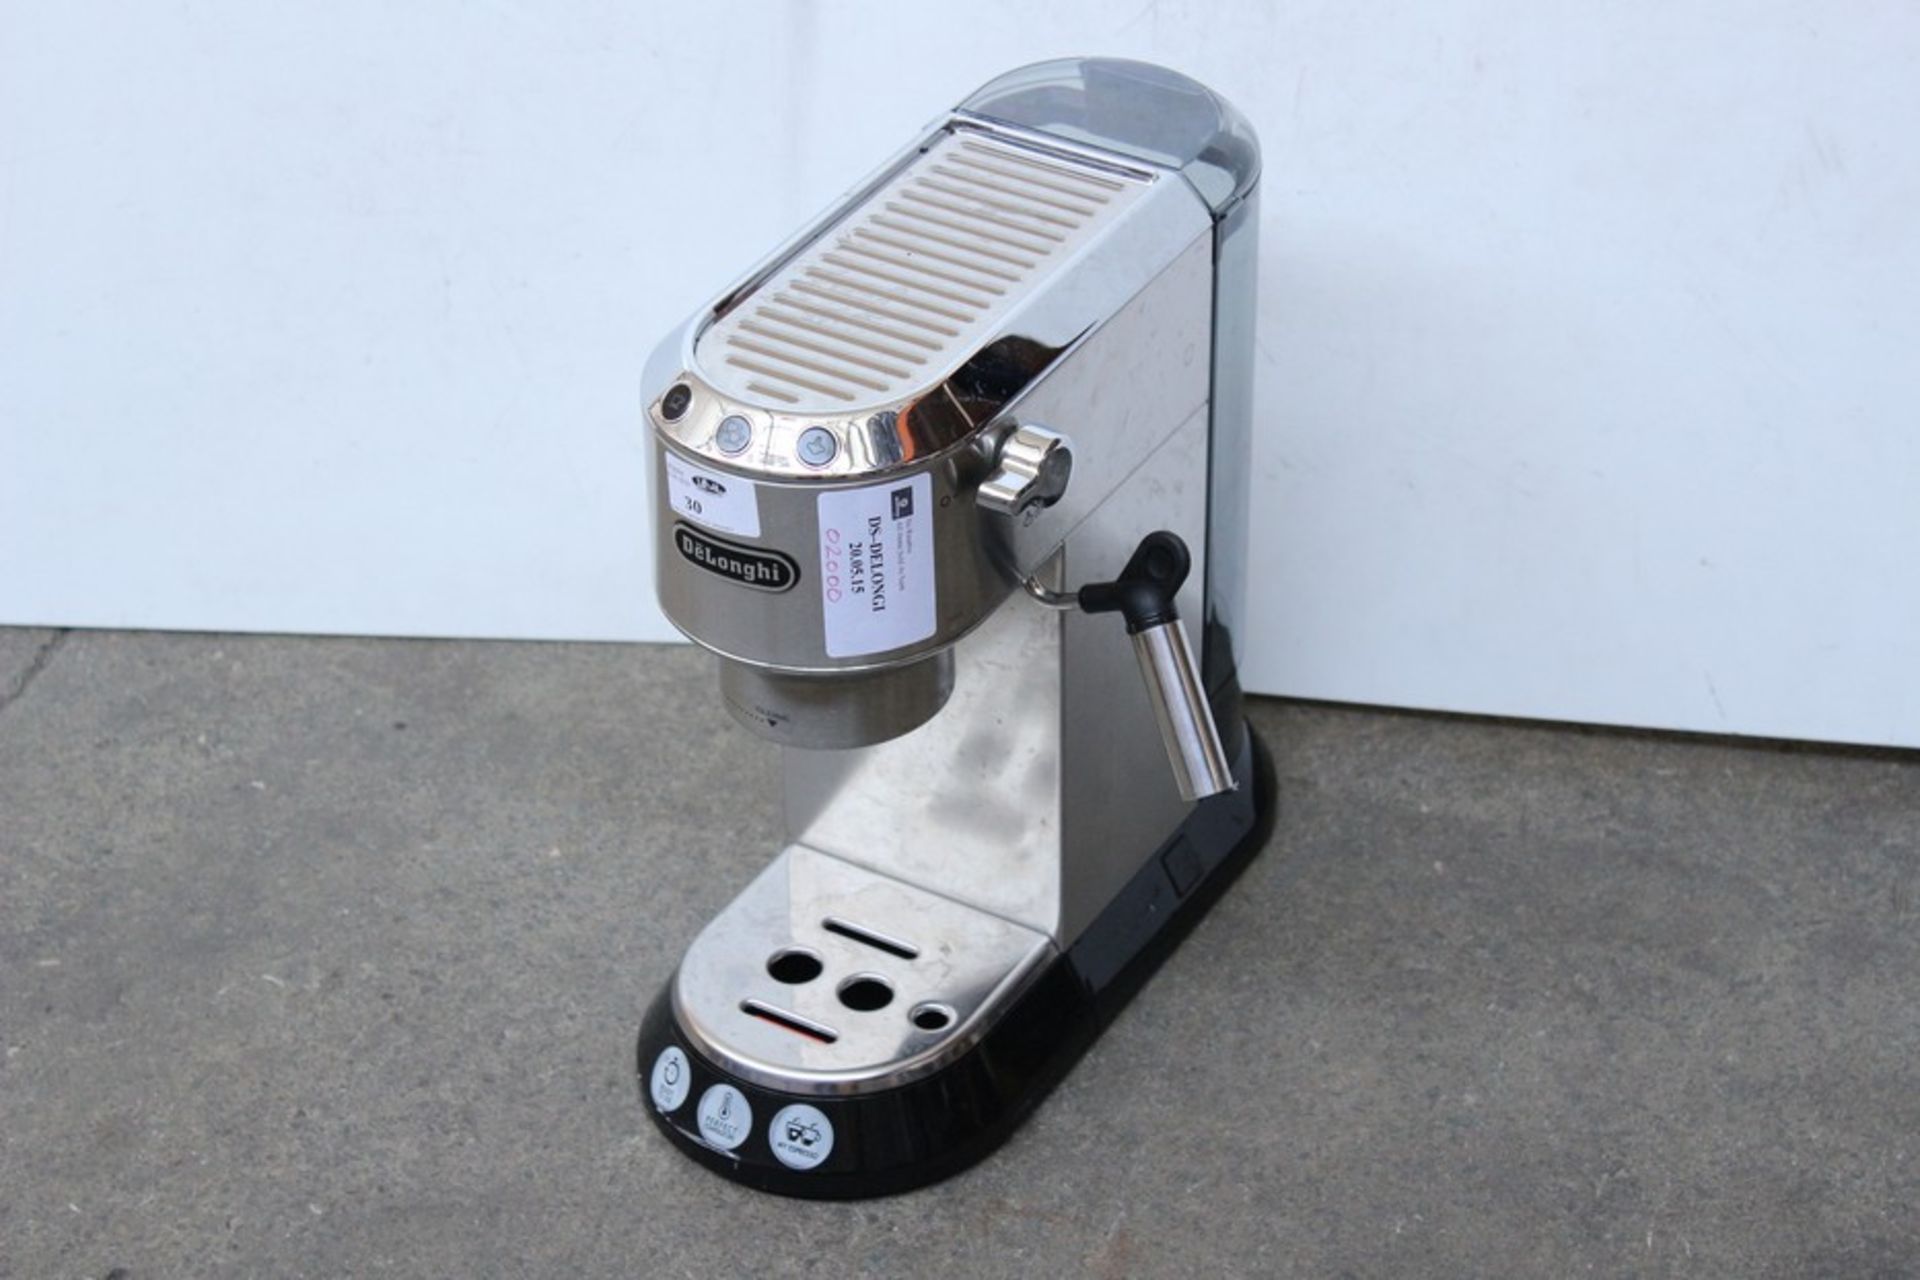 1 x DELONGHI DEDICA STAINLESS STEEL CAPPUCCINO COFFEE MAKER RRP 200   *PLEASE NOTE THAT THE BID